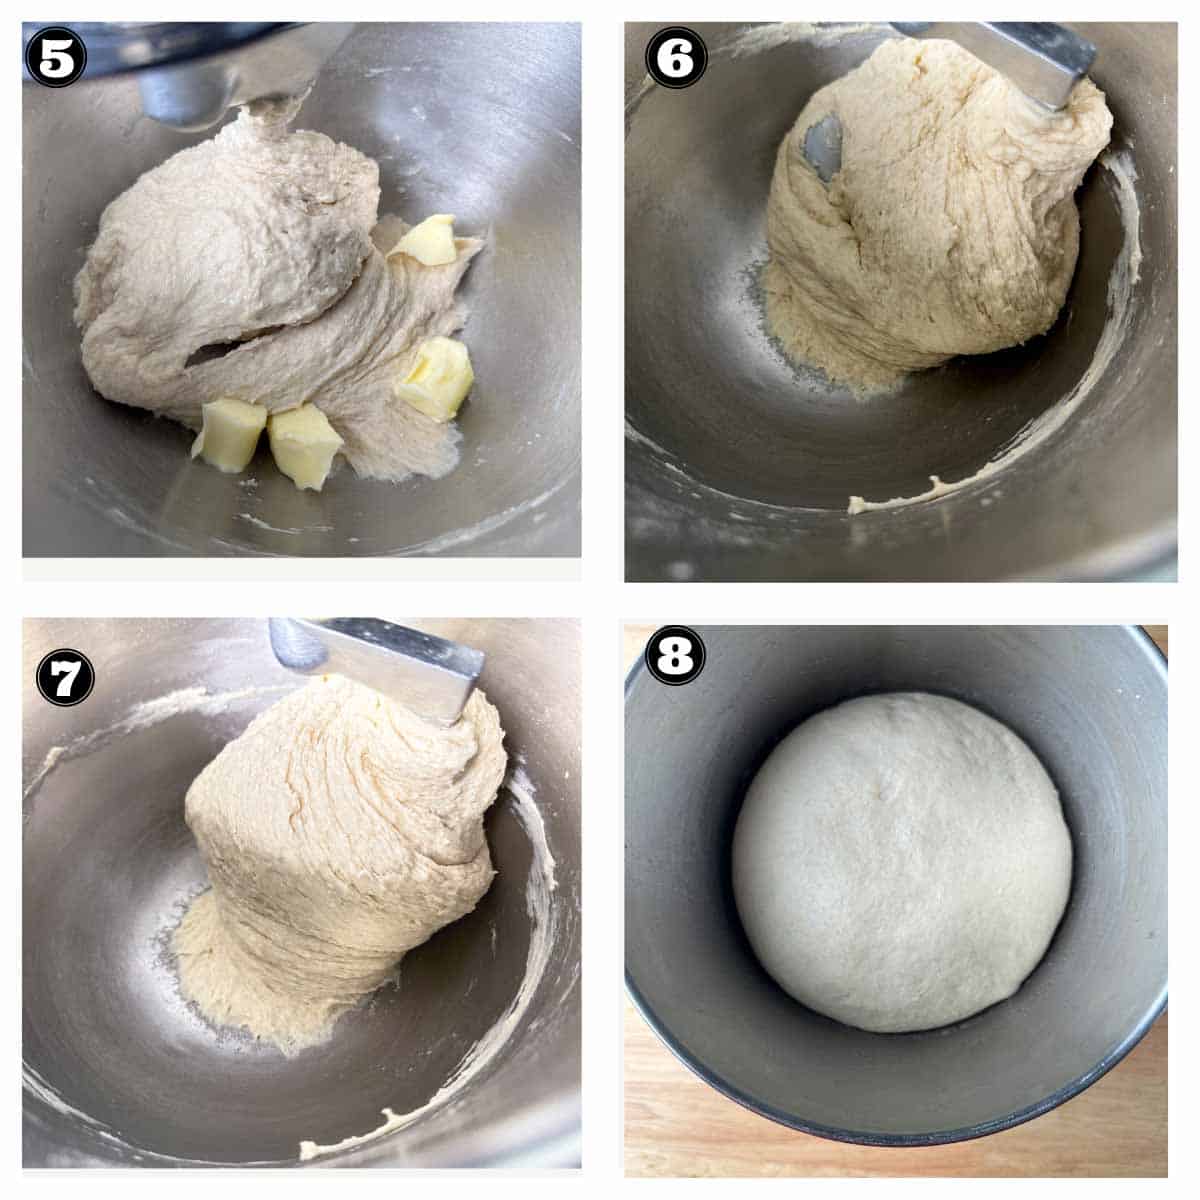 images showing kneading the dough in the stand mixer